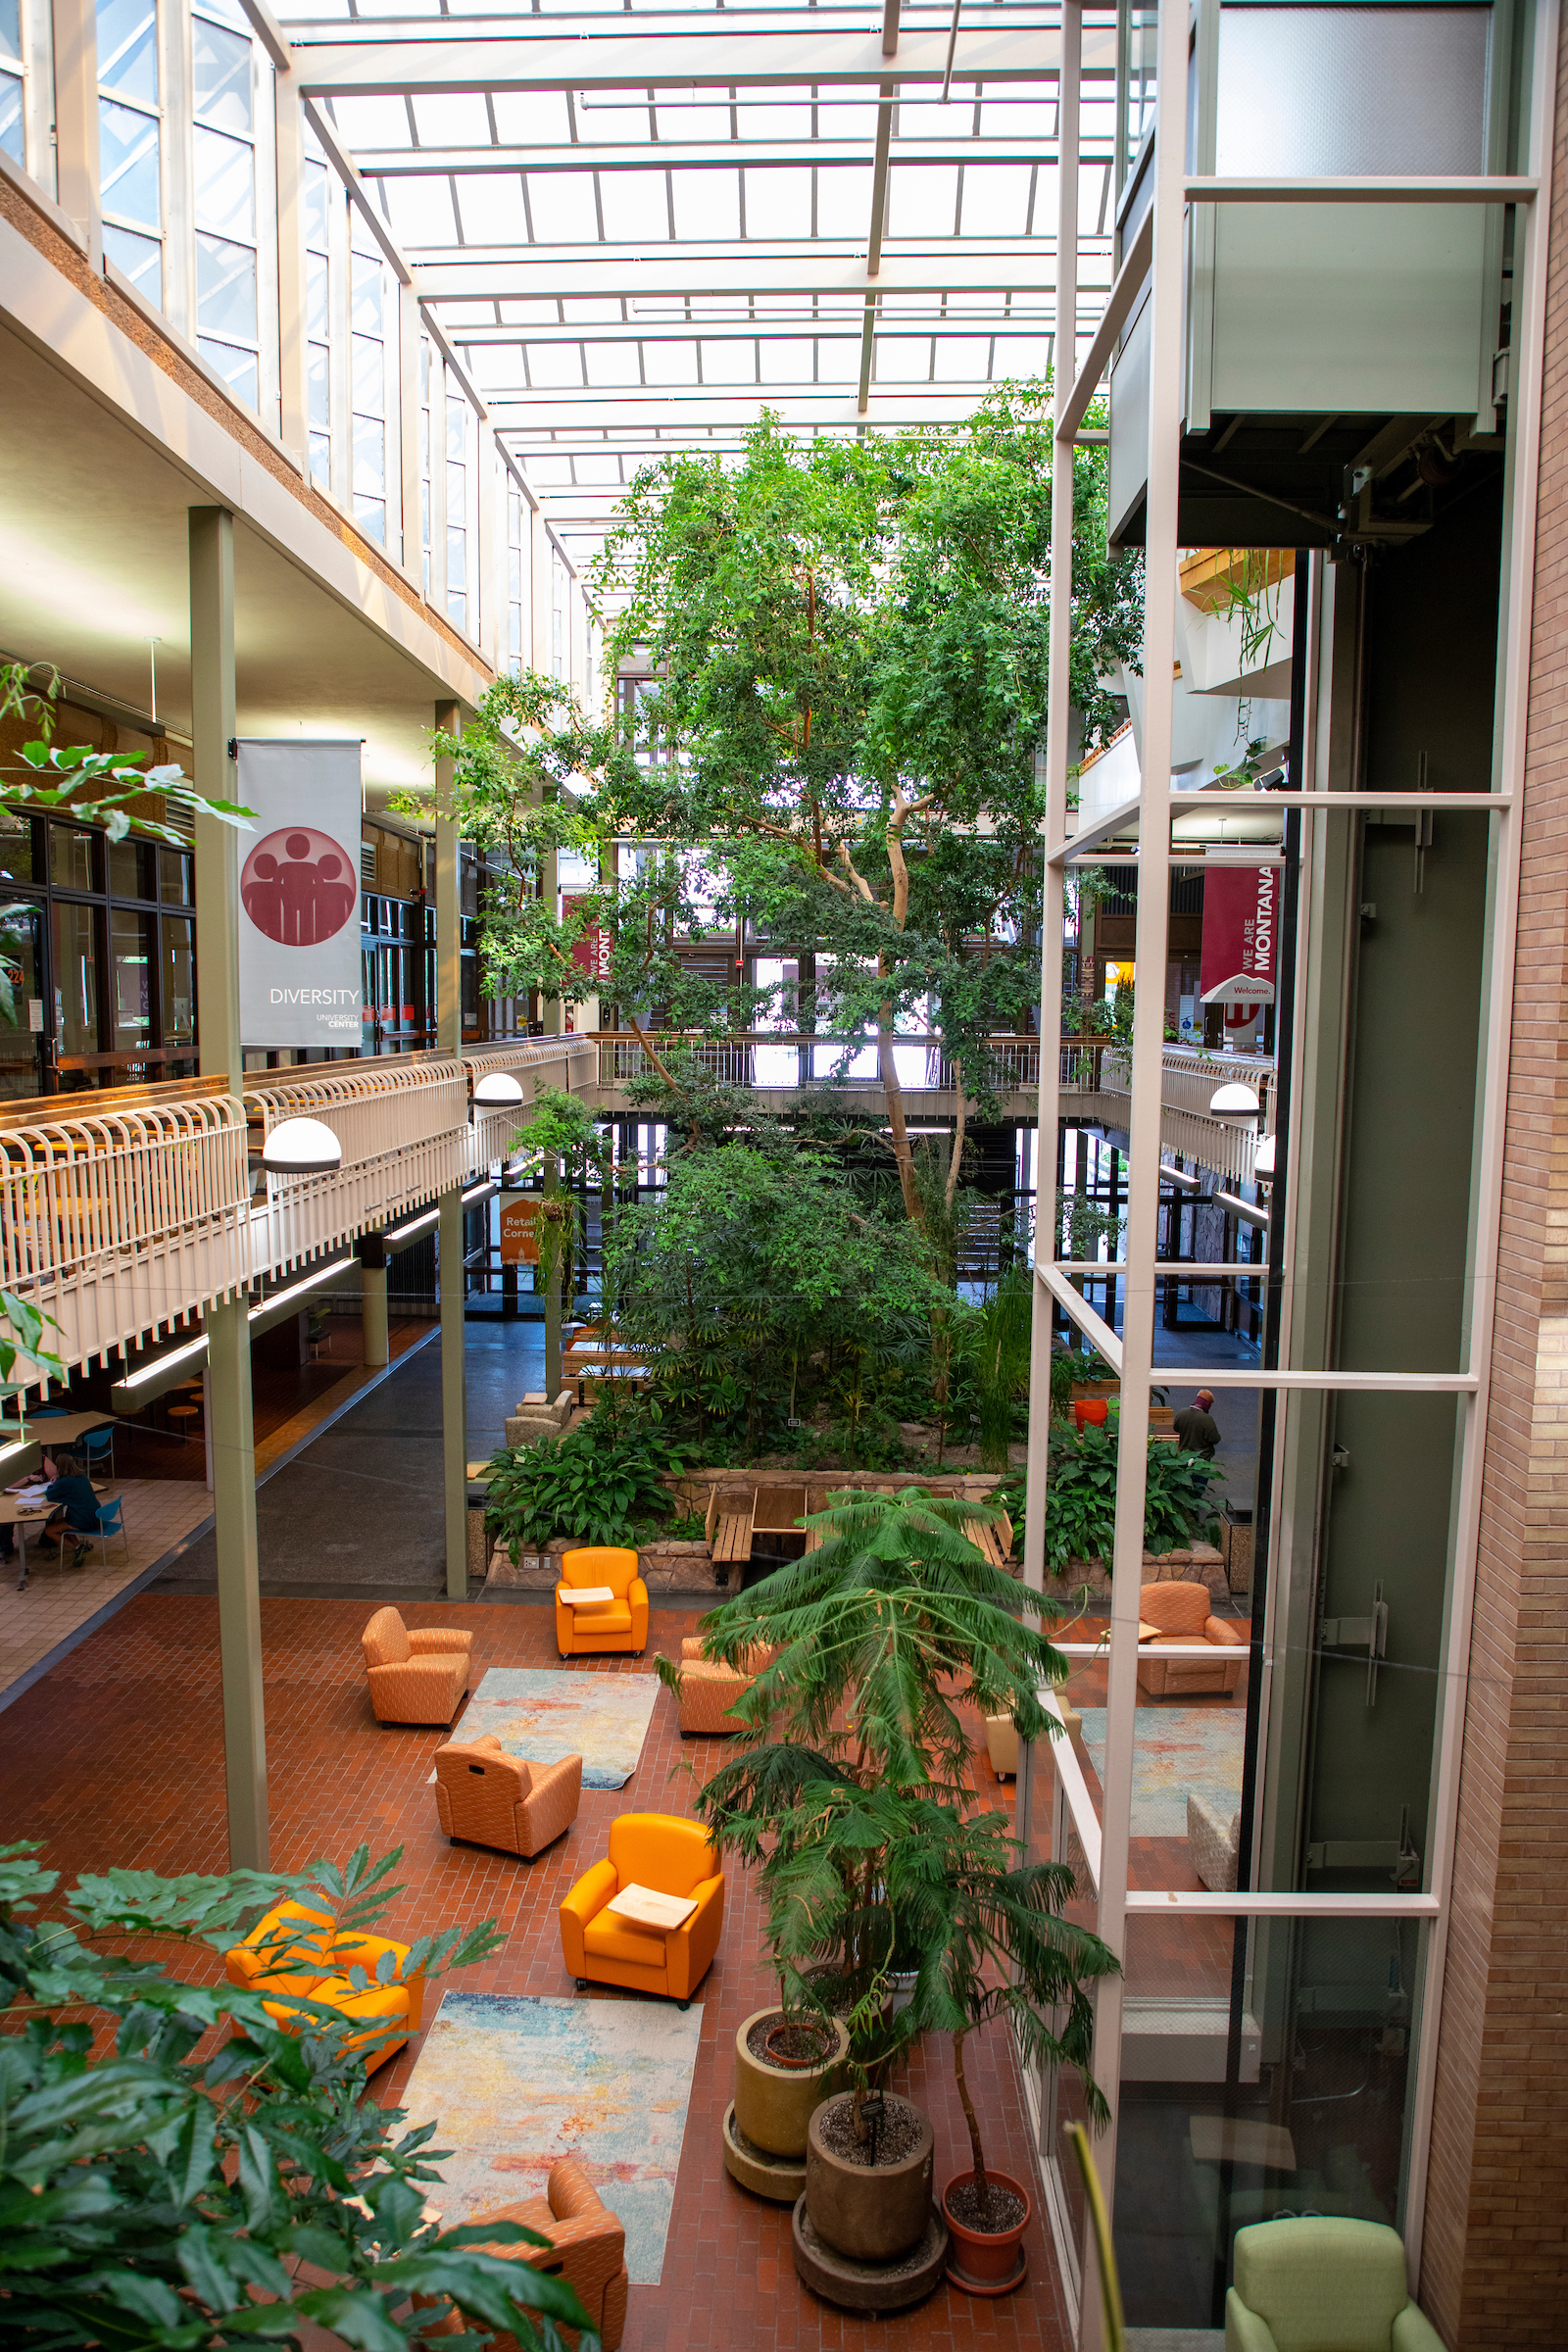 Waterfall and plants in the UC Atrium